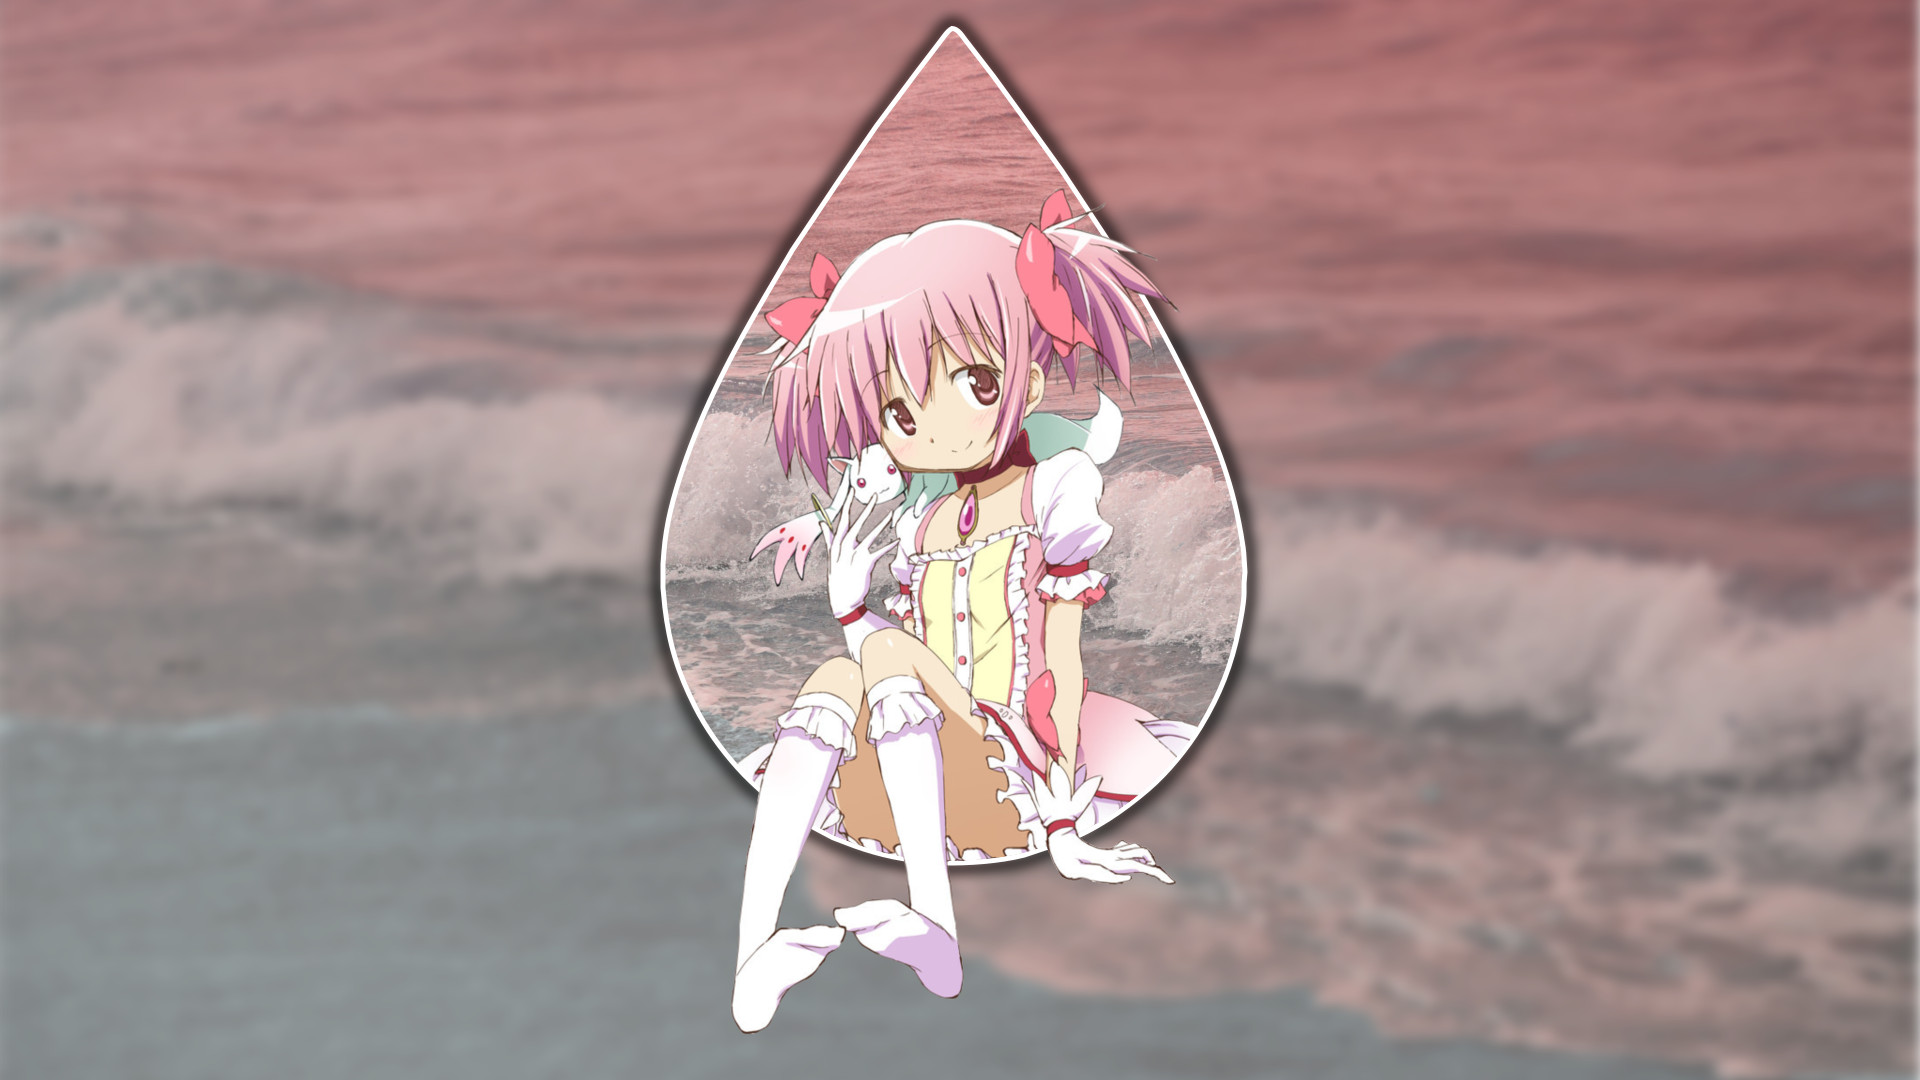 Anime 1920x1080 Mahou Shoujo Madoka Magica Kaname Madoka Kyuubey picture-in-picture looking at viewer loli